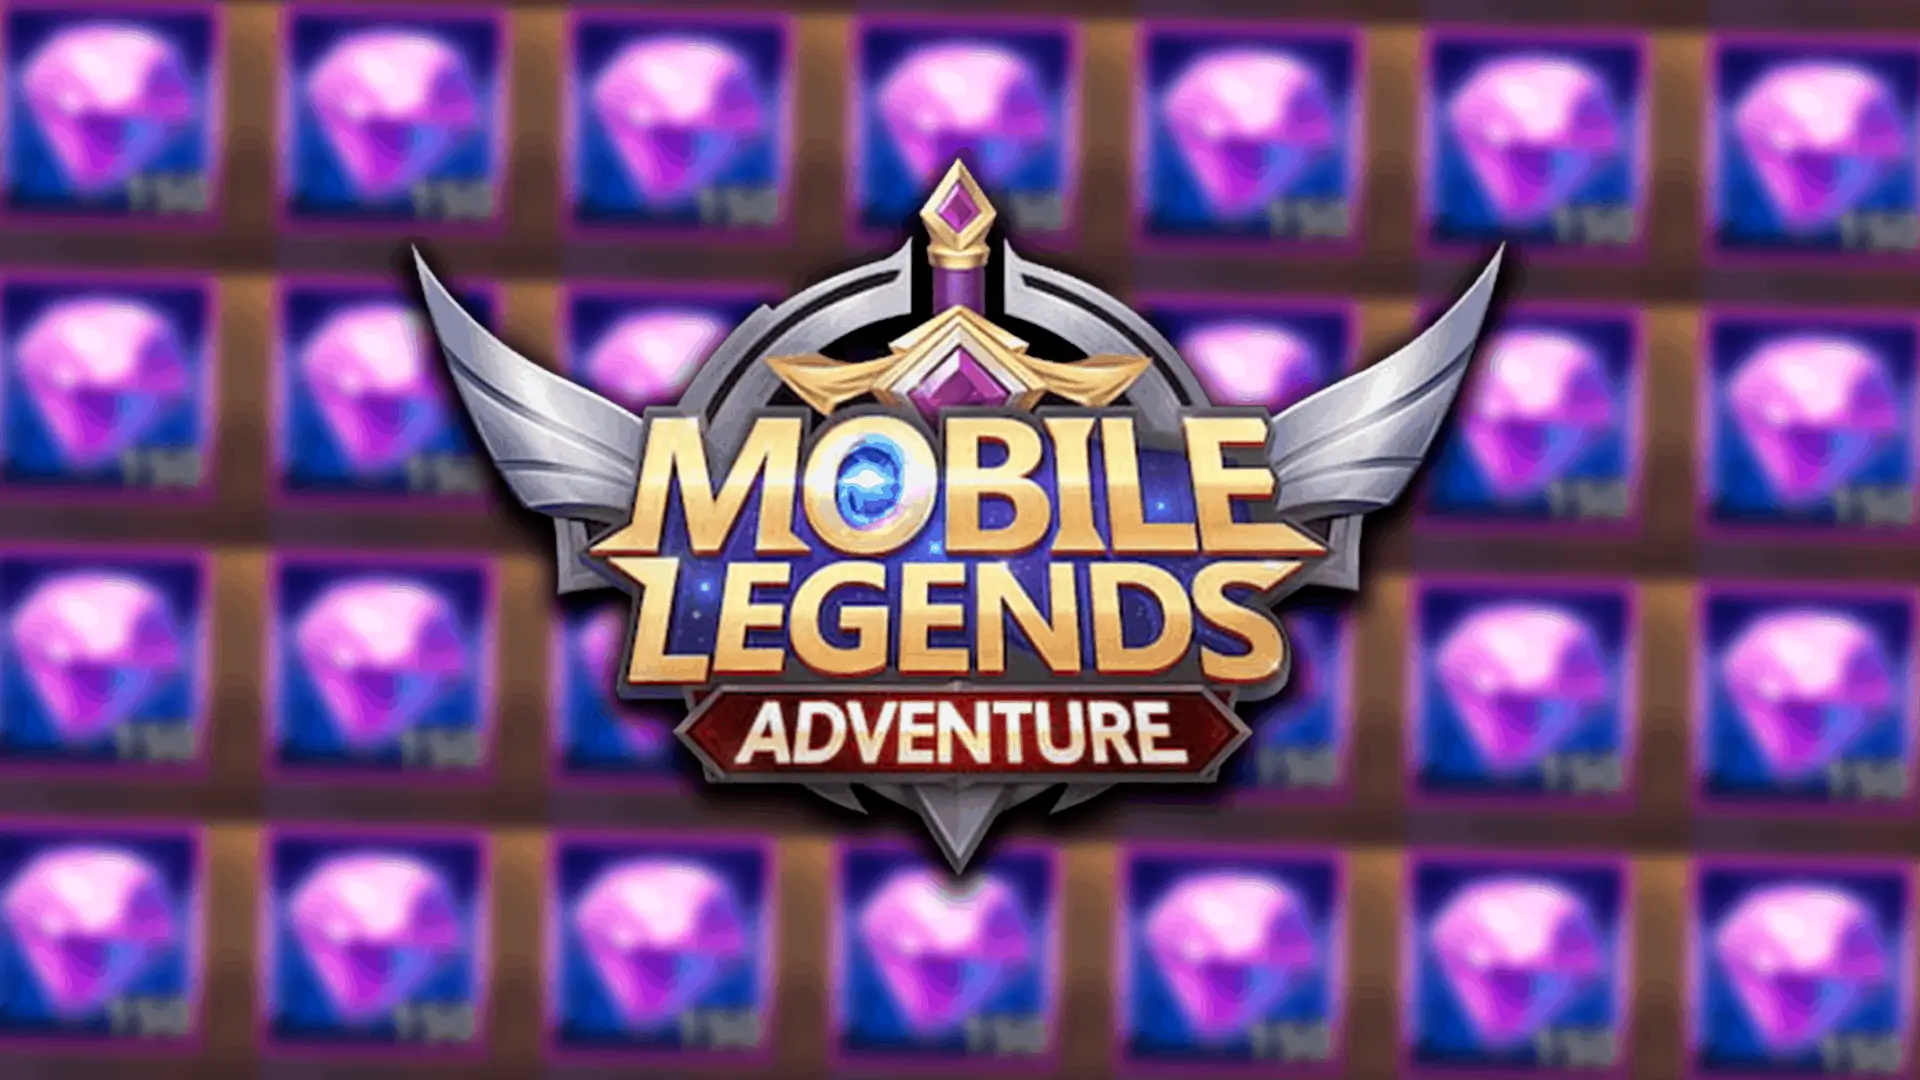 You are currently viewing Mobile Legends: Adventure – How To Get Diamonds